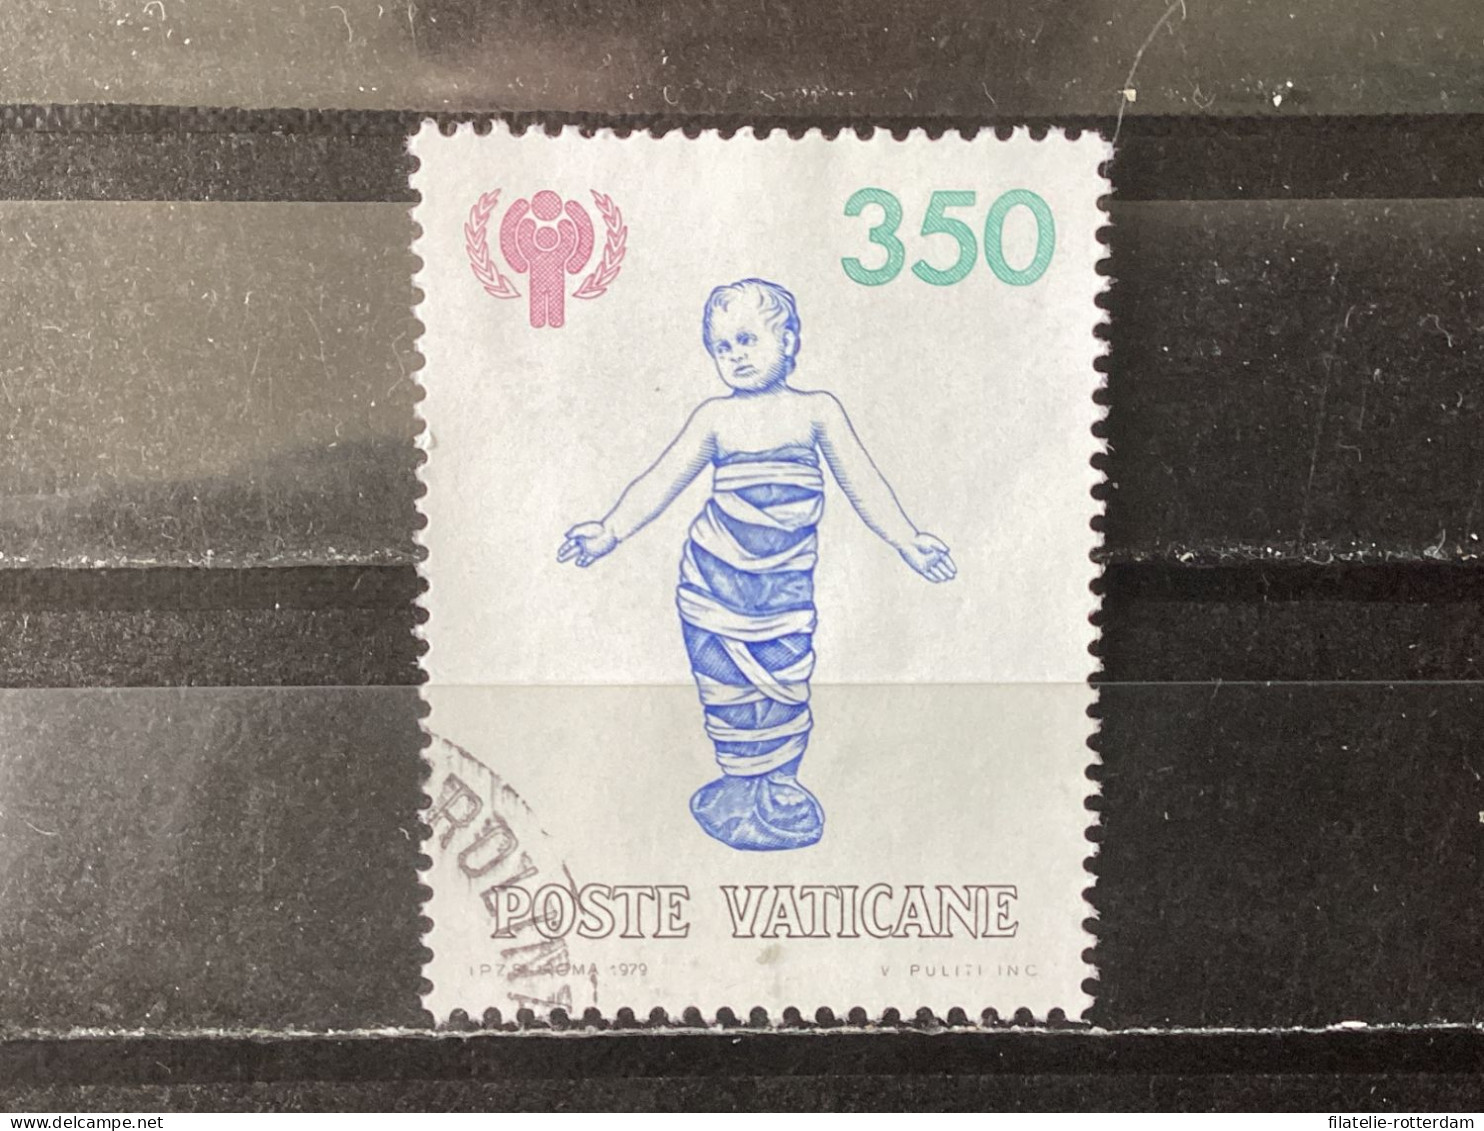 Vatican City / Vaticaanstad - International Year Of The Child (350) 1979 - Used Stamps